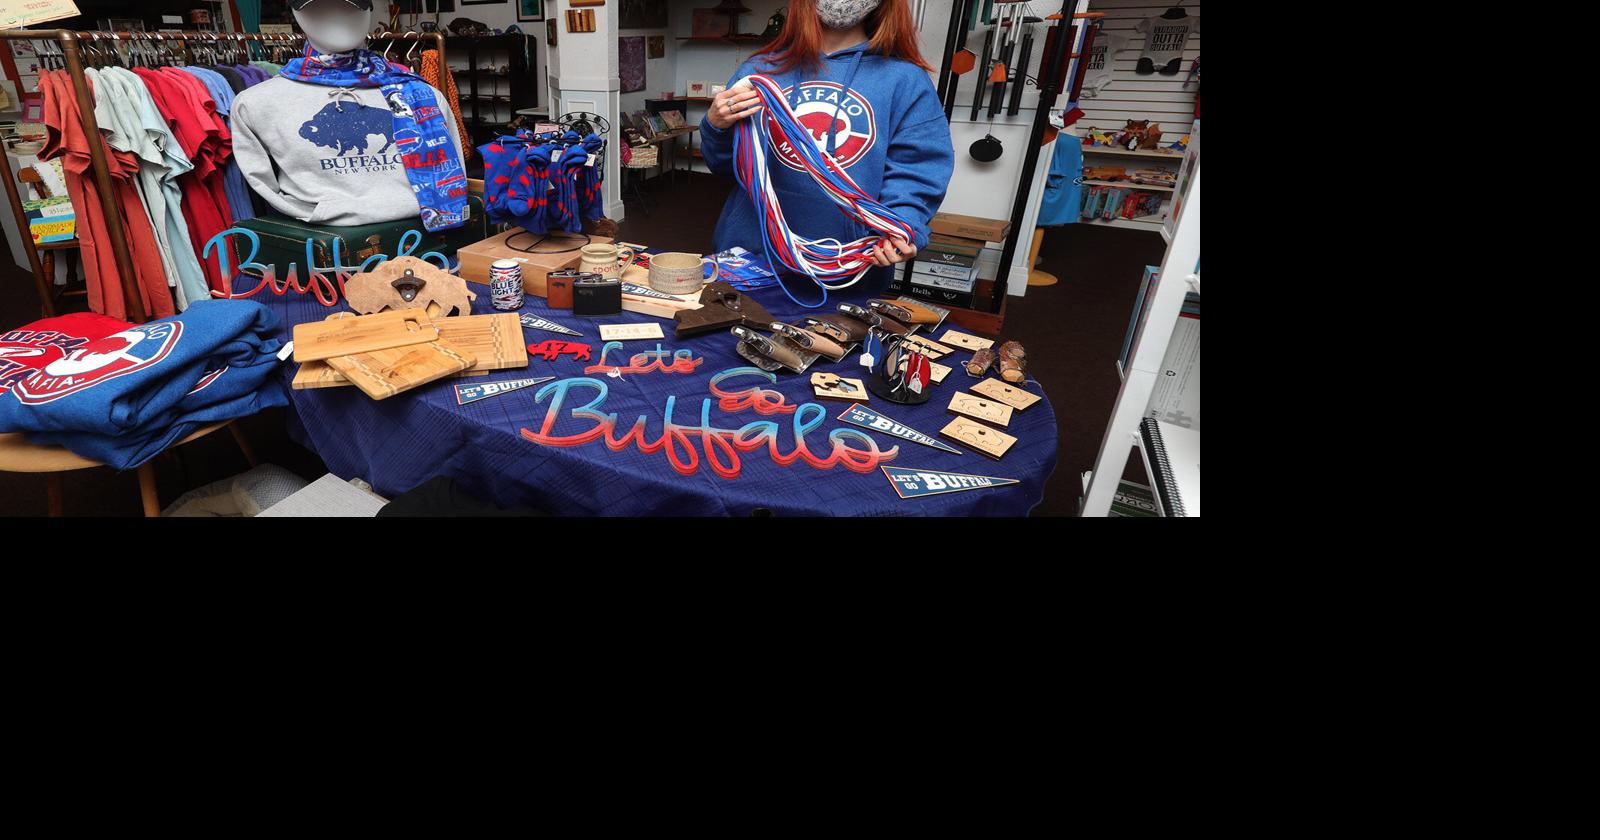 In the quest for Bills merchandise, sellers find creative ways to